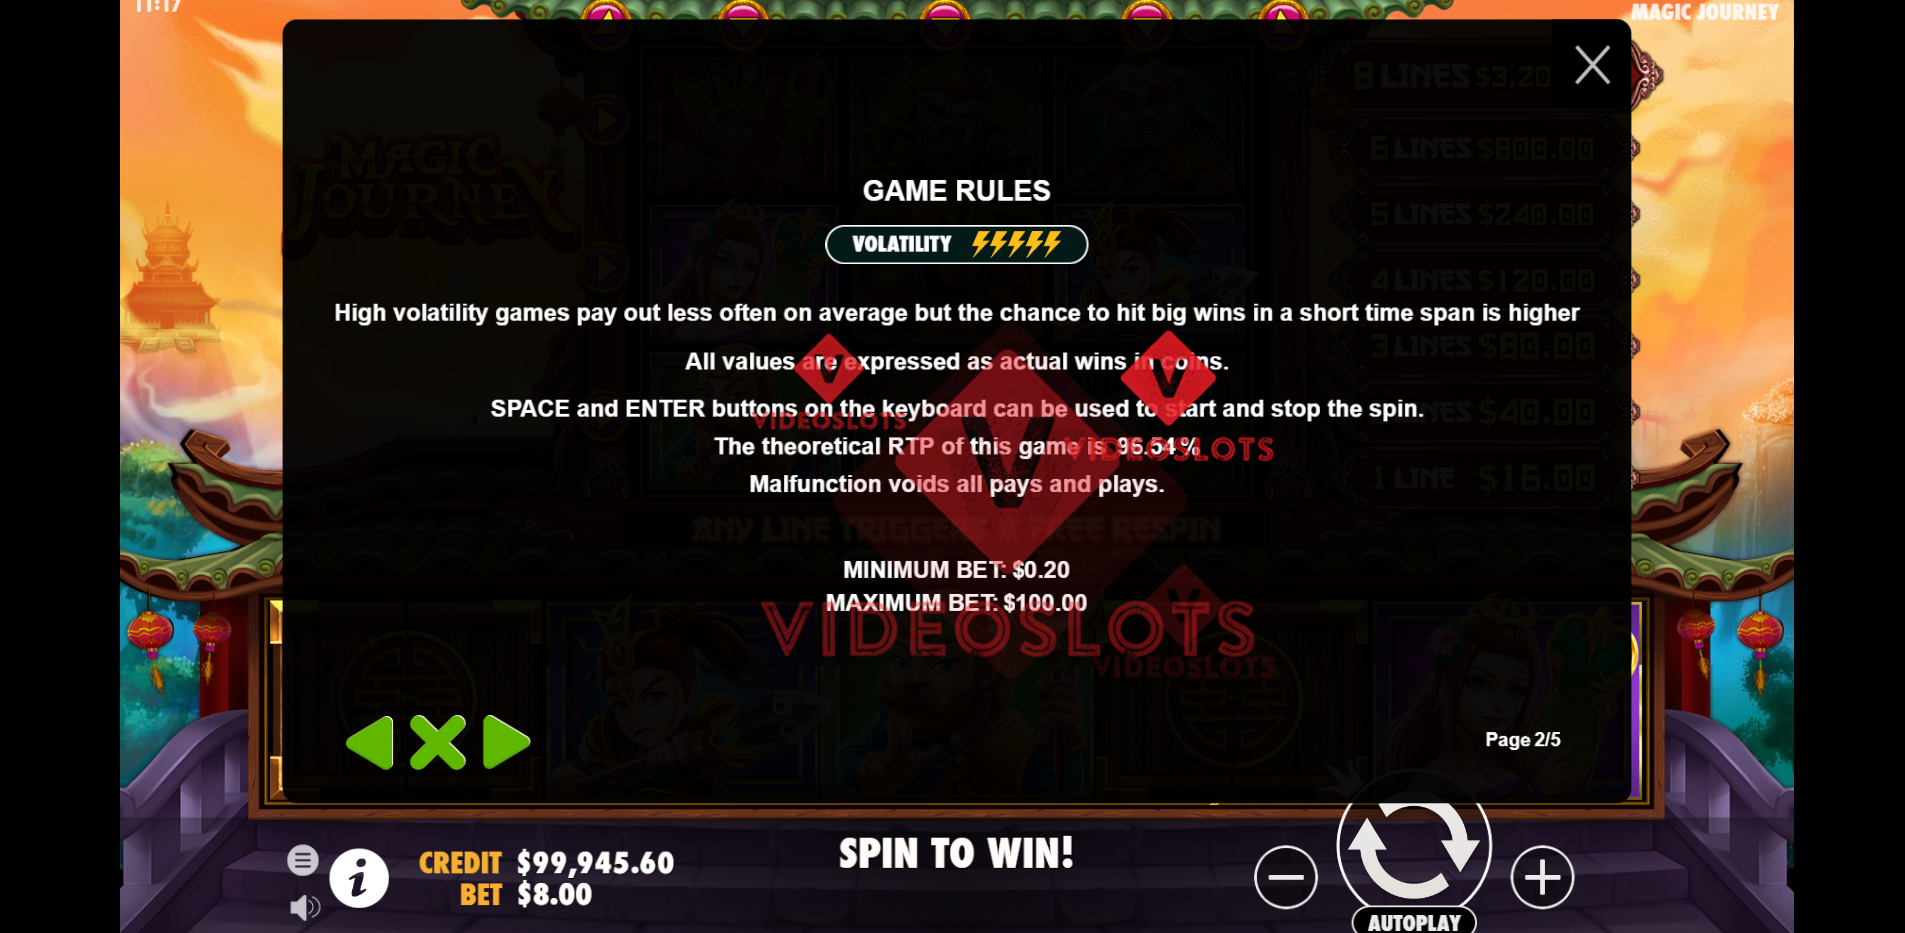 Game Rules for Magic Journey slot by Pragmatic Play